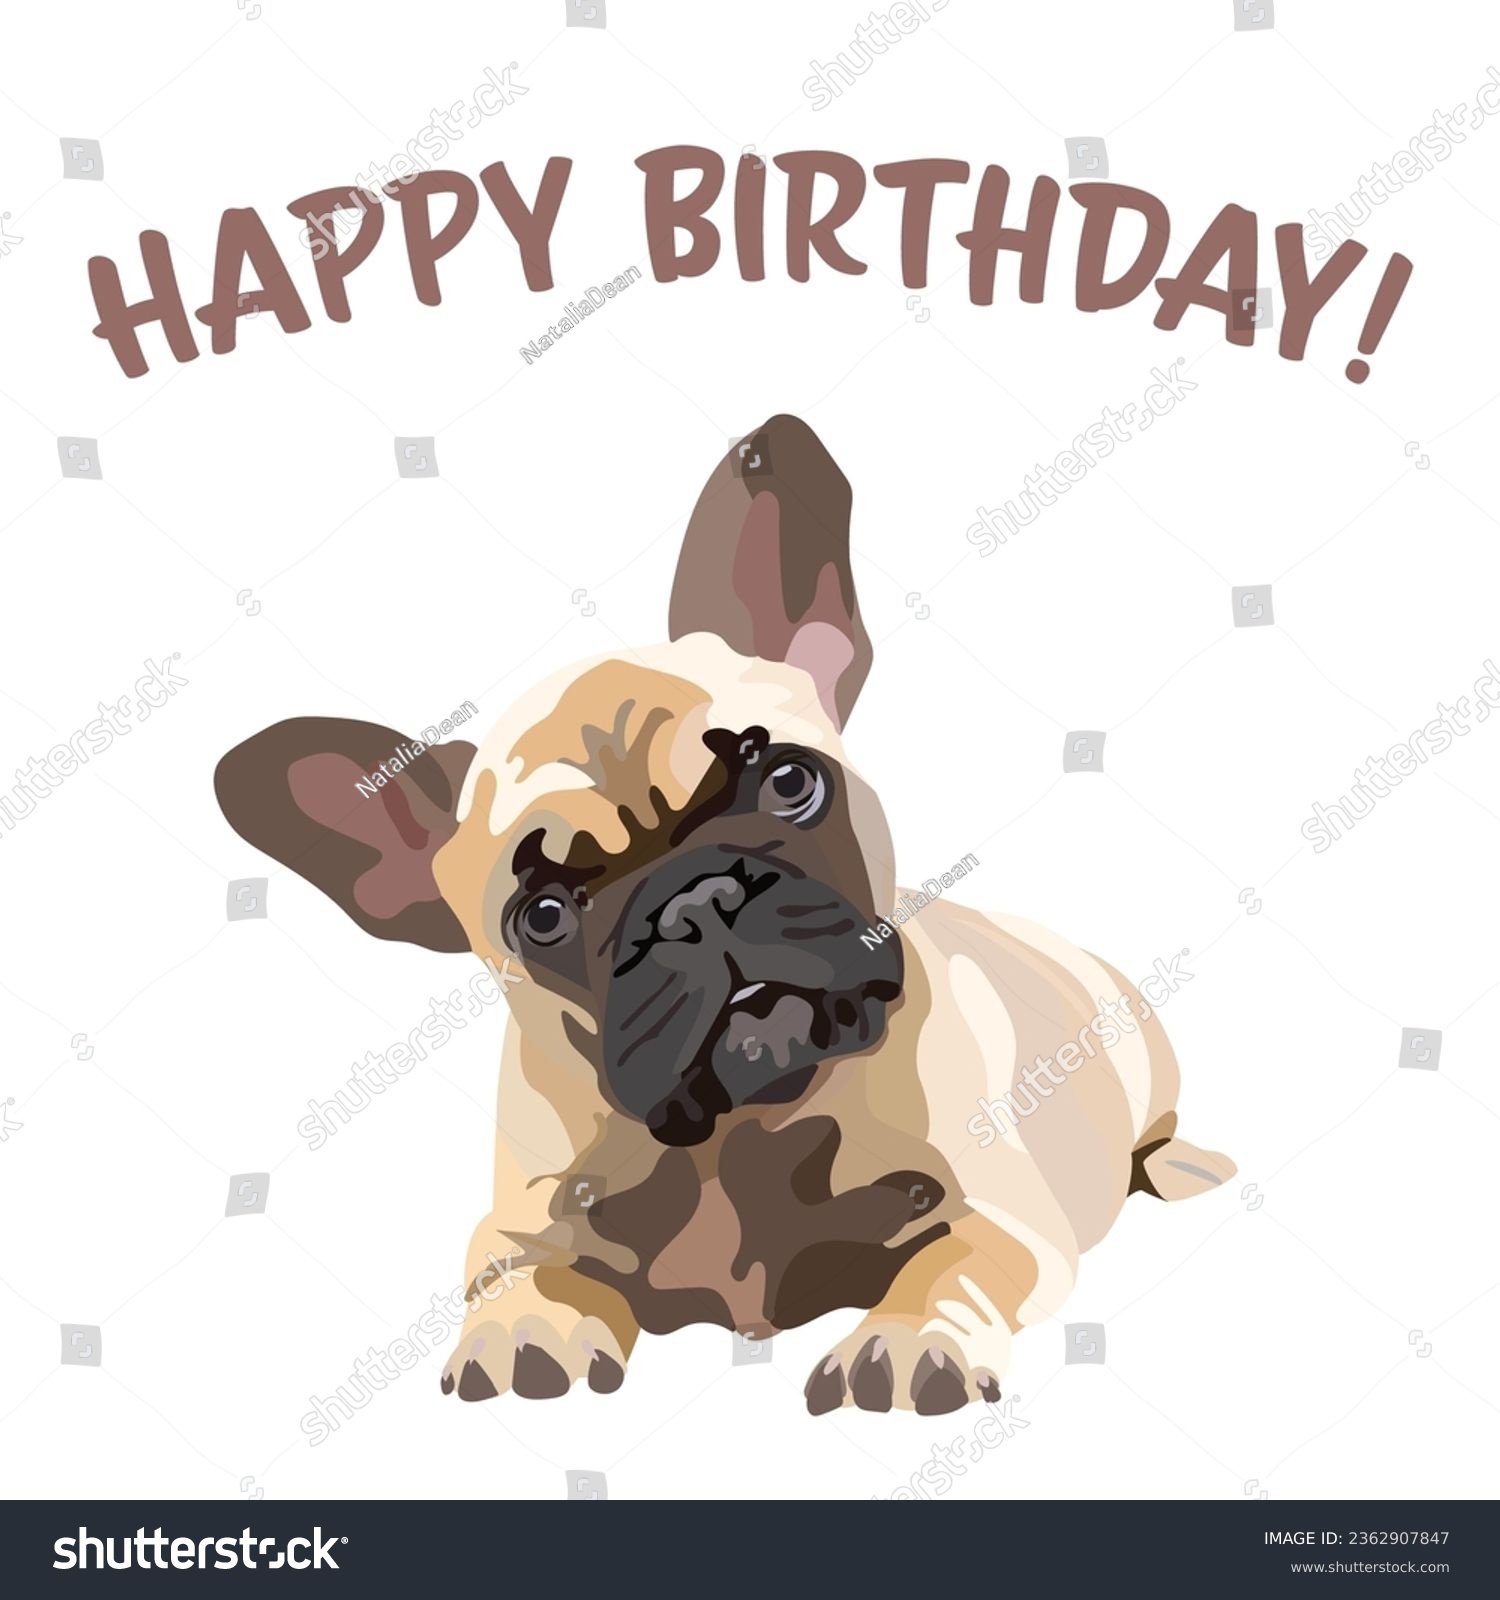 SVG of French Bulldog Breed Happy birthday card. Card with a dog and text, holiday design. Present for a dog lover. Funny cartoon dog breed illustration. Minimalistic birthday card with frenchie. Fun present svg